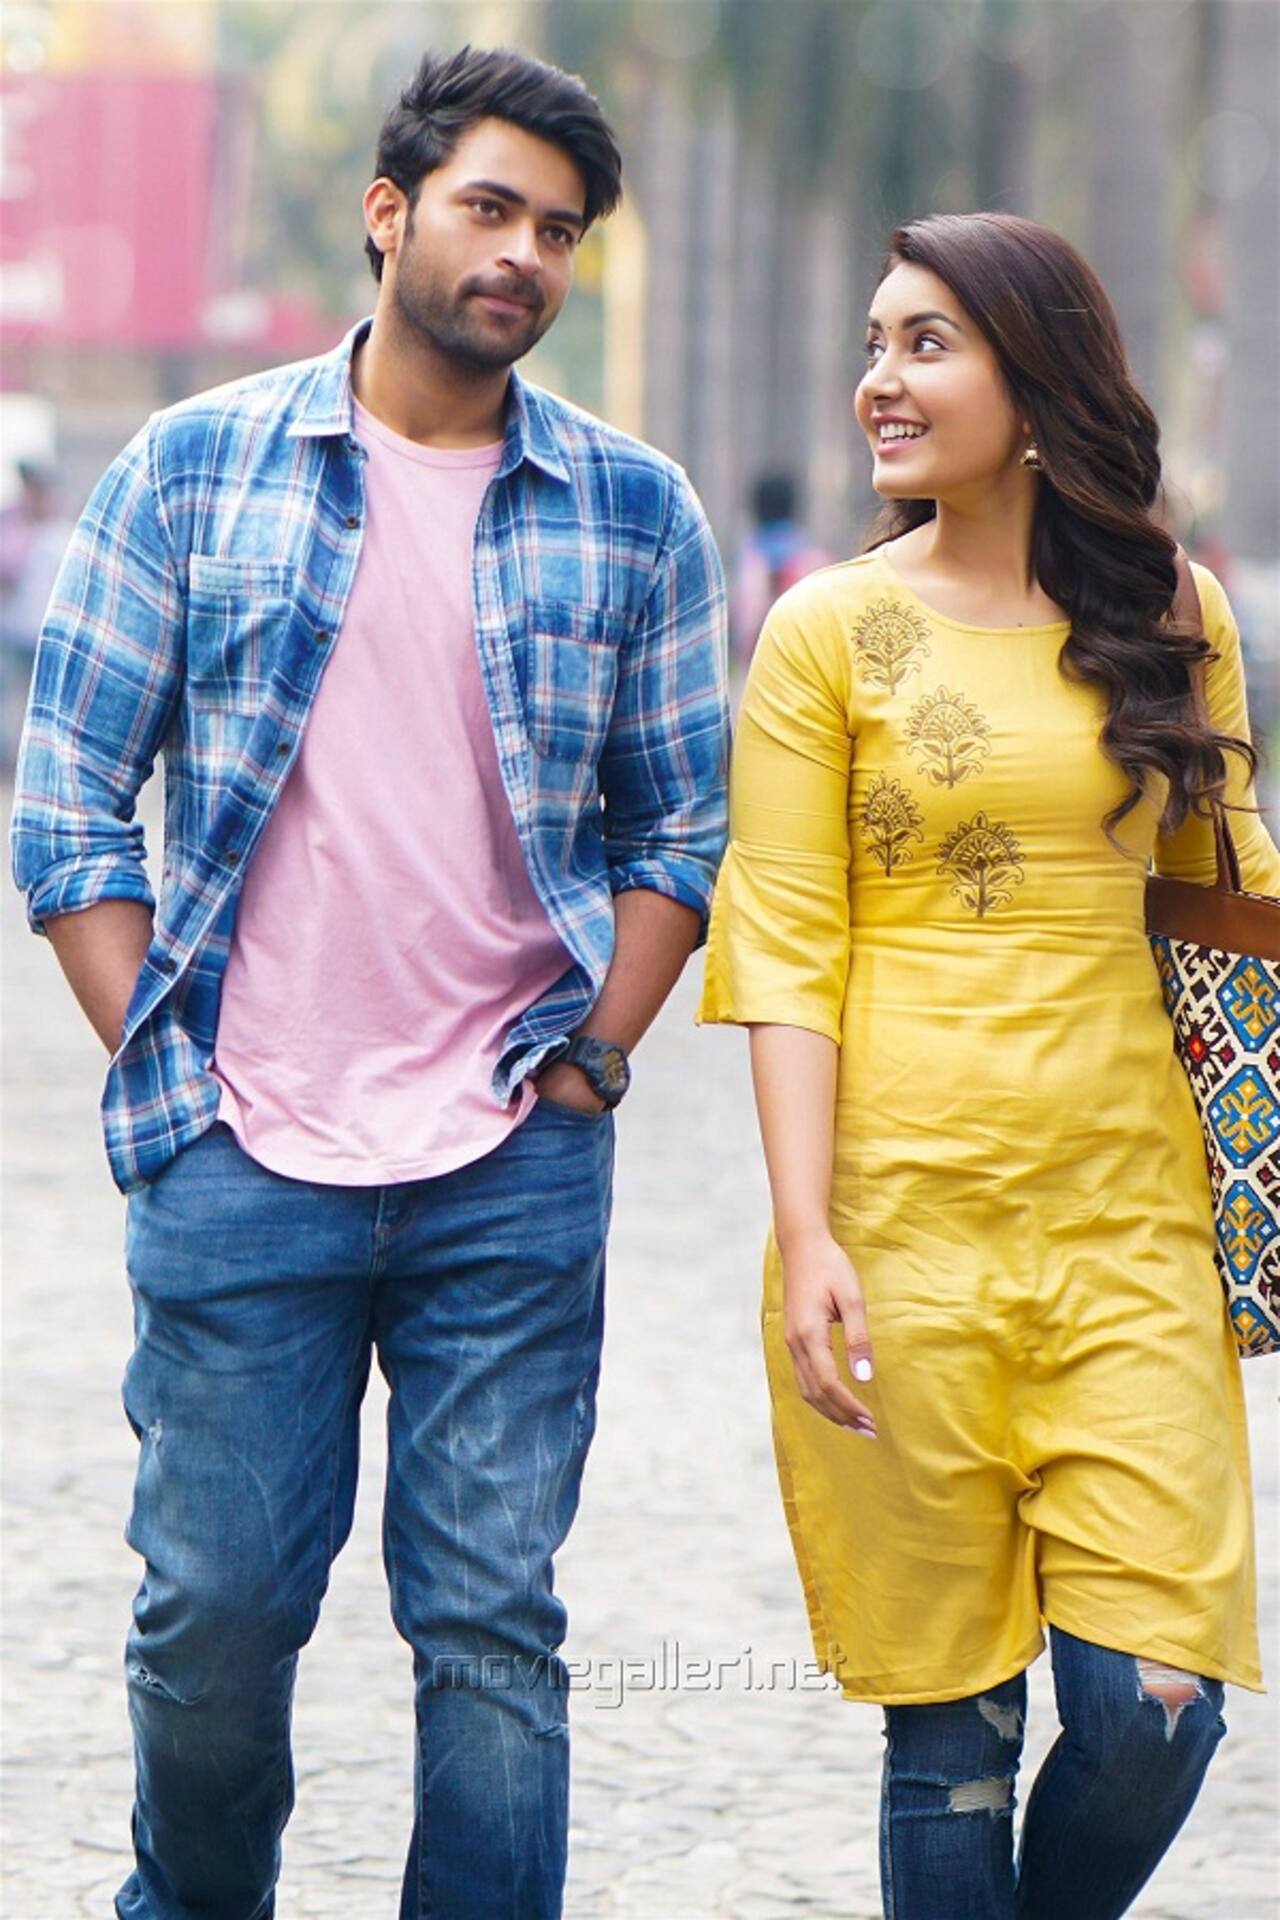 Tholi Prema movie review Critics can't stop raving about Varun Tej and